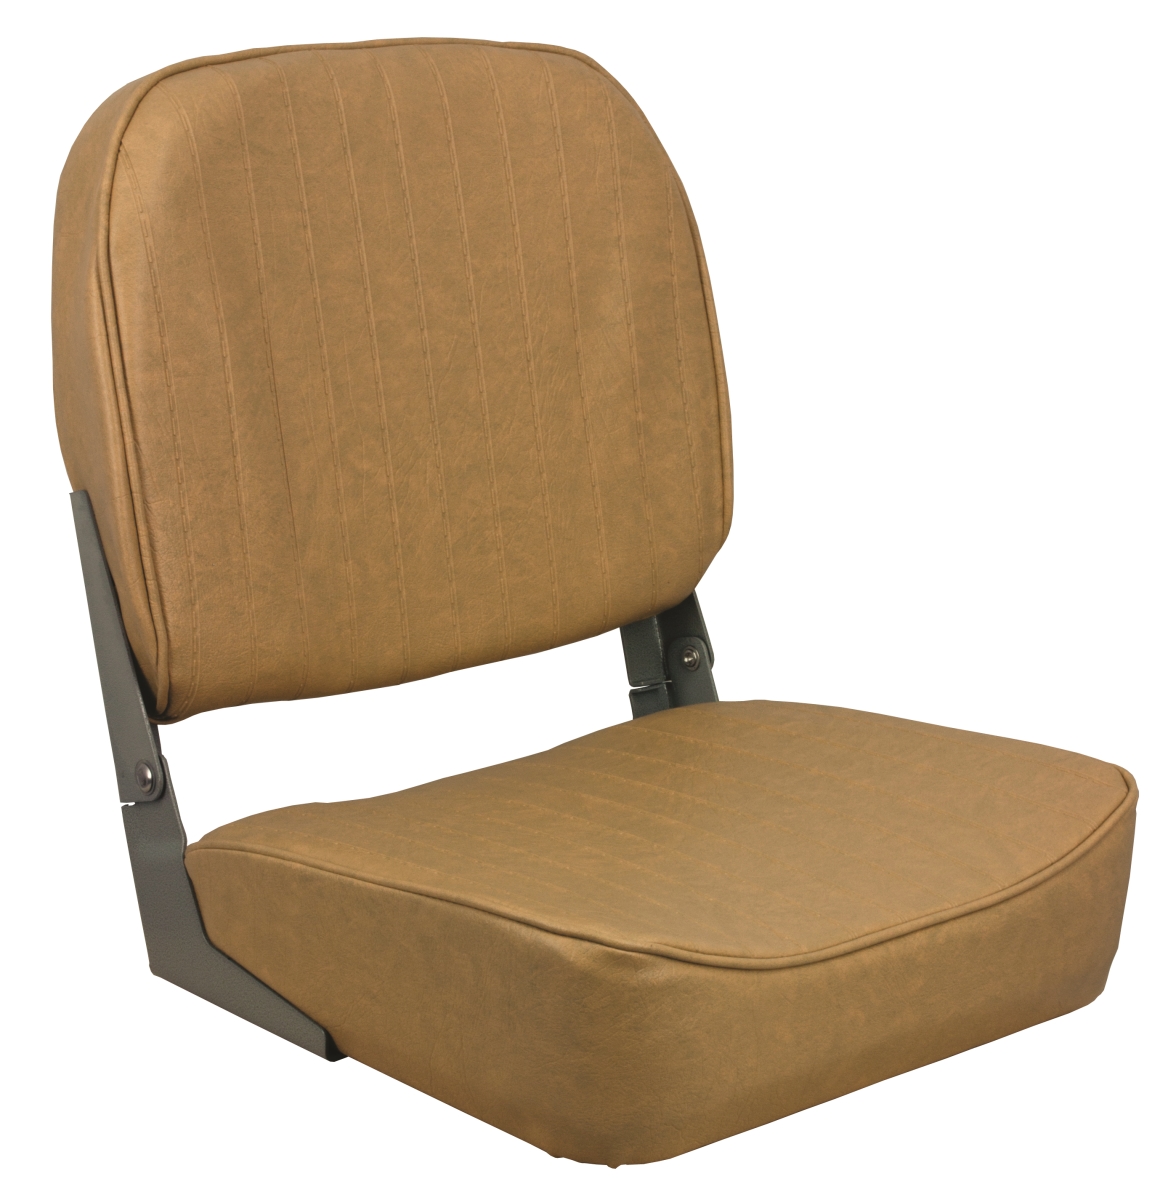 Picture of Springfield Marine 3002.0059 Economy Folding Standard Chair